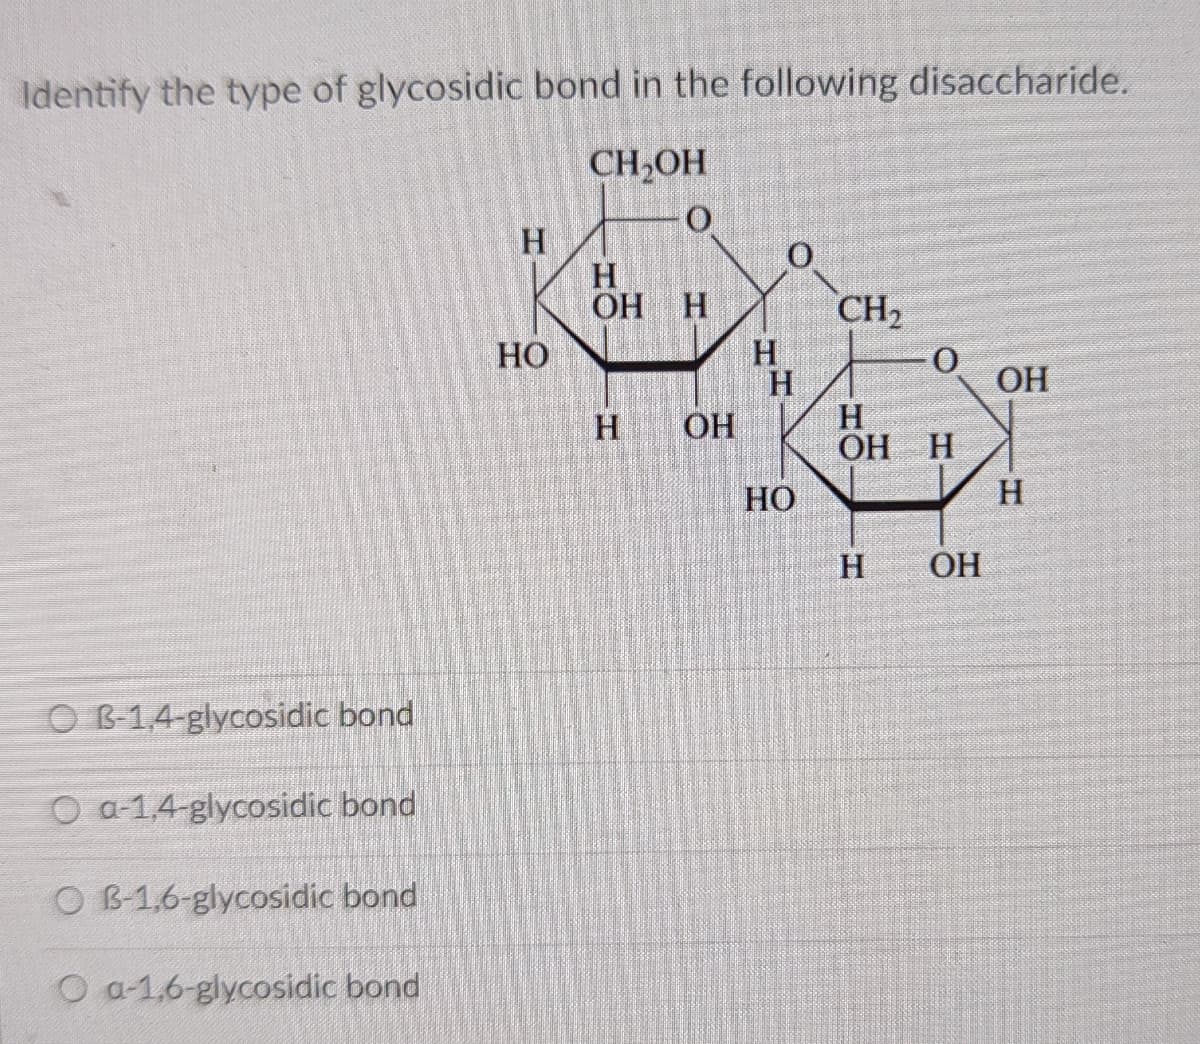 Identify the type of glycosidic bond in the following disaccharide.
CH,OH
H
H
ОН Н
CH2
H
H
H
ОН Н
HO
ОН
H.
ОН
HO
H
H
OH
O B-1,4-glycosidic bond
O a-1,4-glycosidic bond
O B-1,6-glycosidic bond
O a-1,6-glycosidic bond
